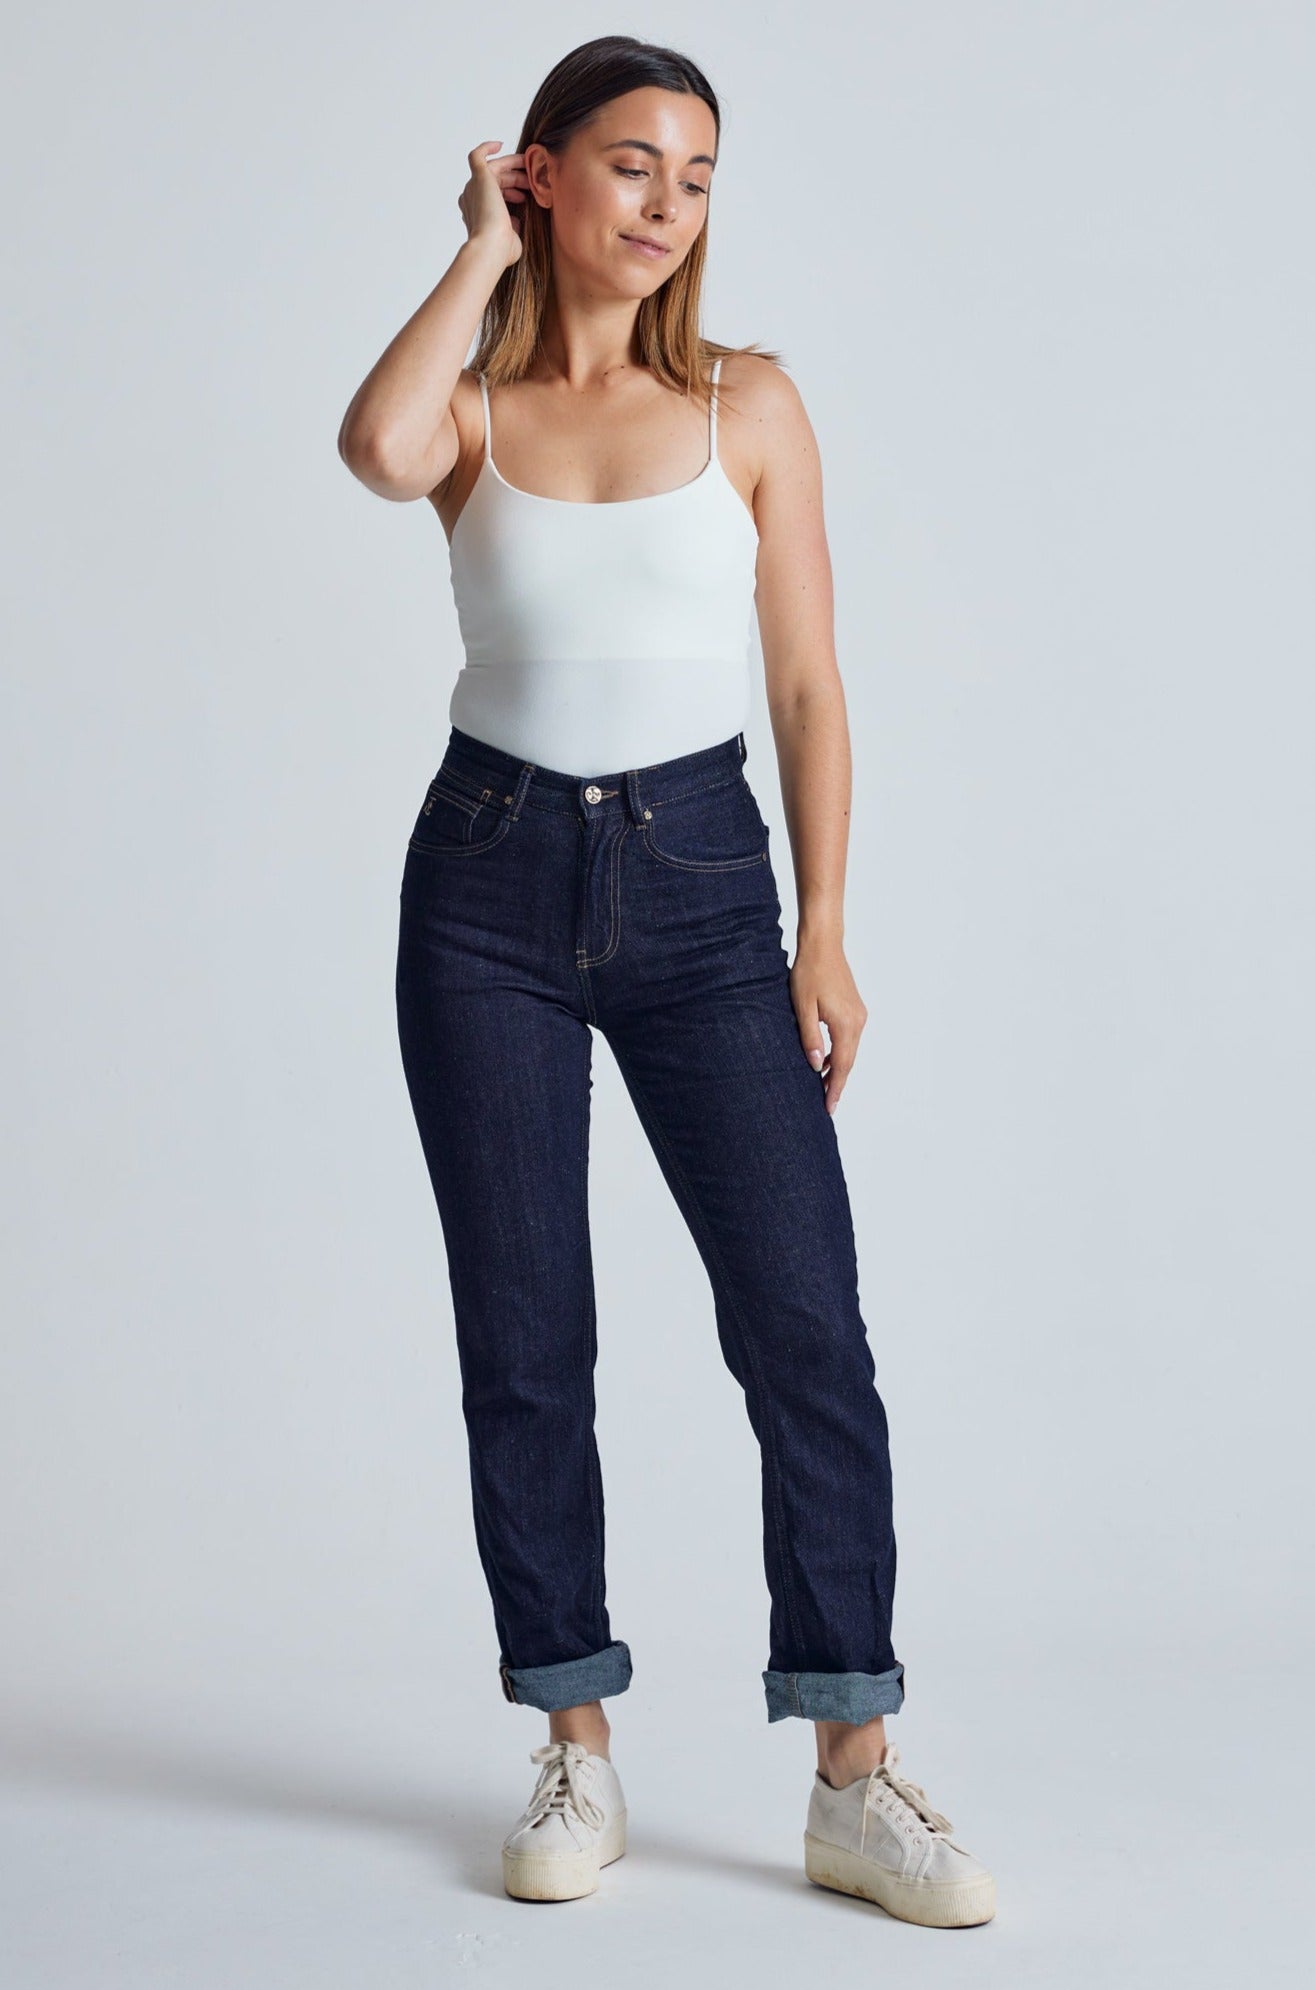 Rinse Lucille Tapered Jeans - GOTS Certified Organic Cotton And Hemp